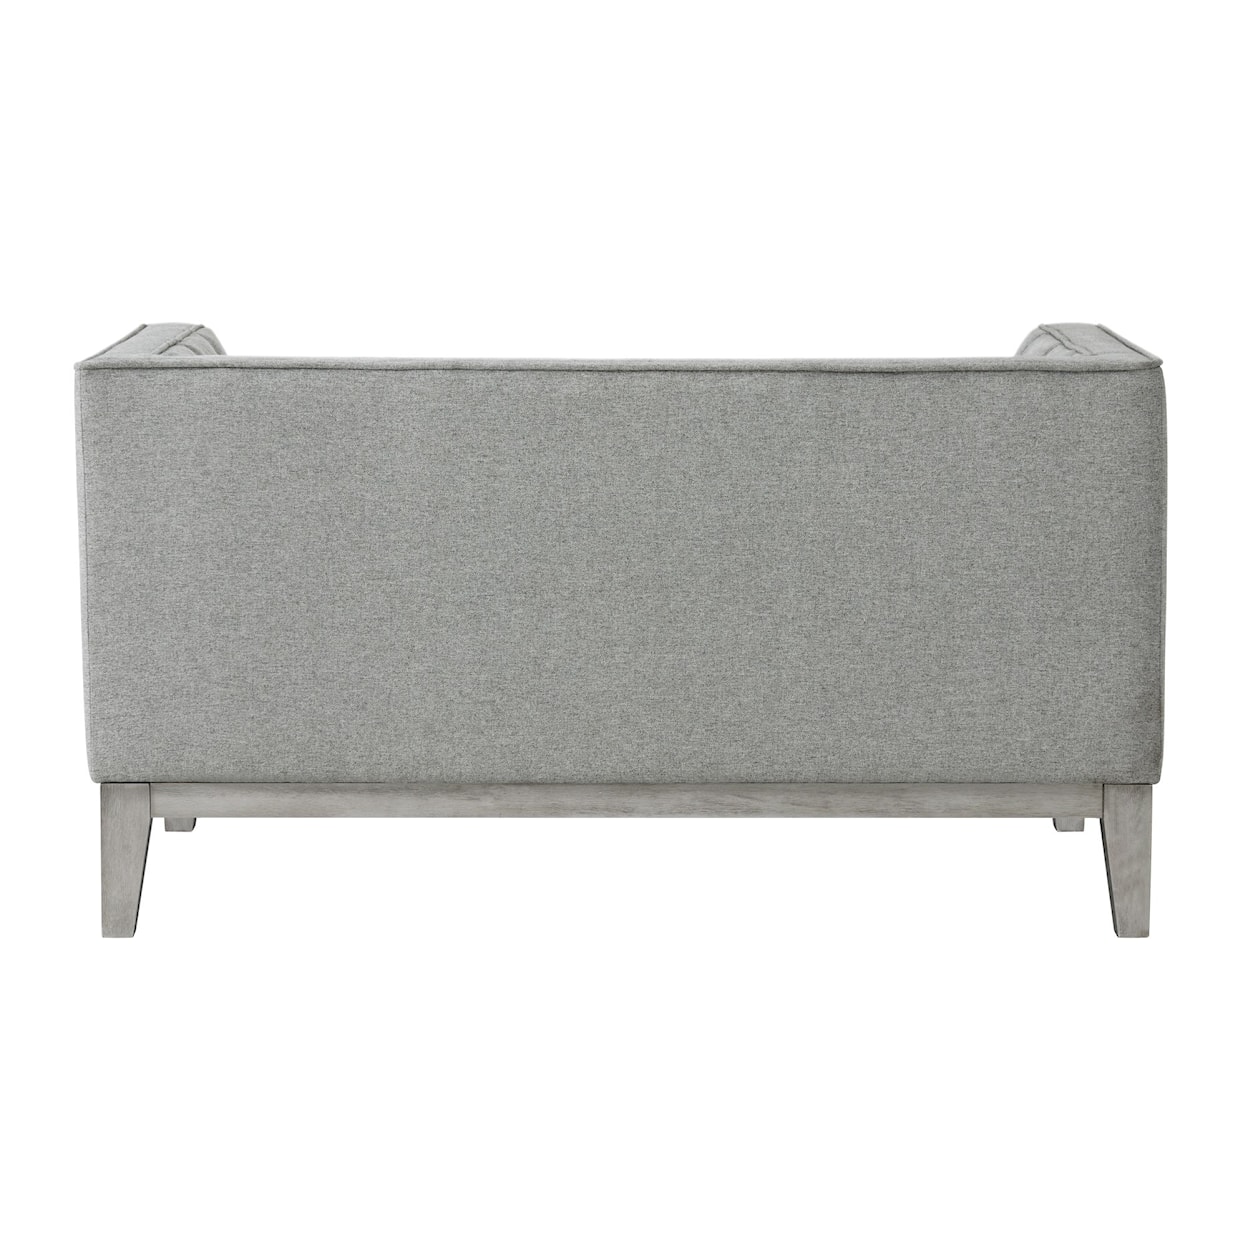 Elements Cannes Loveseat